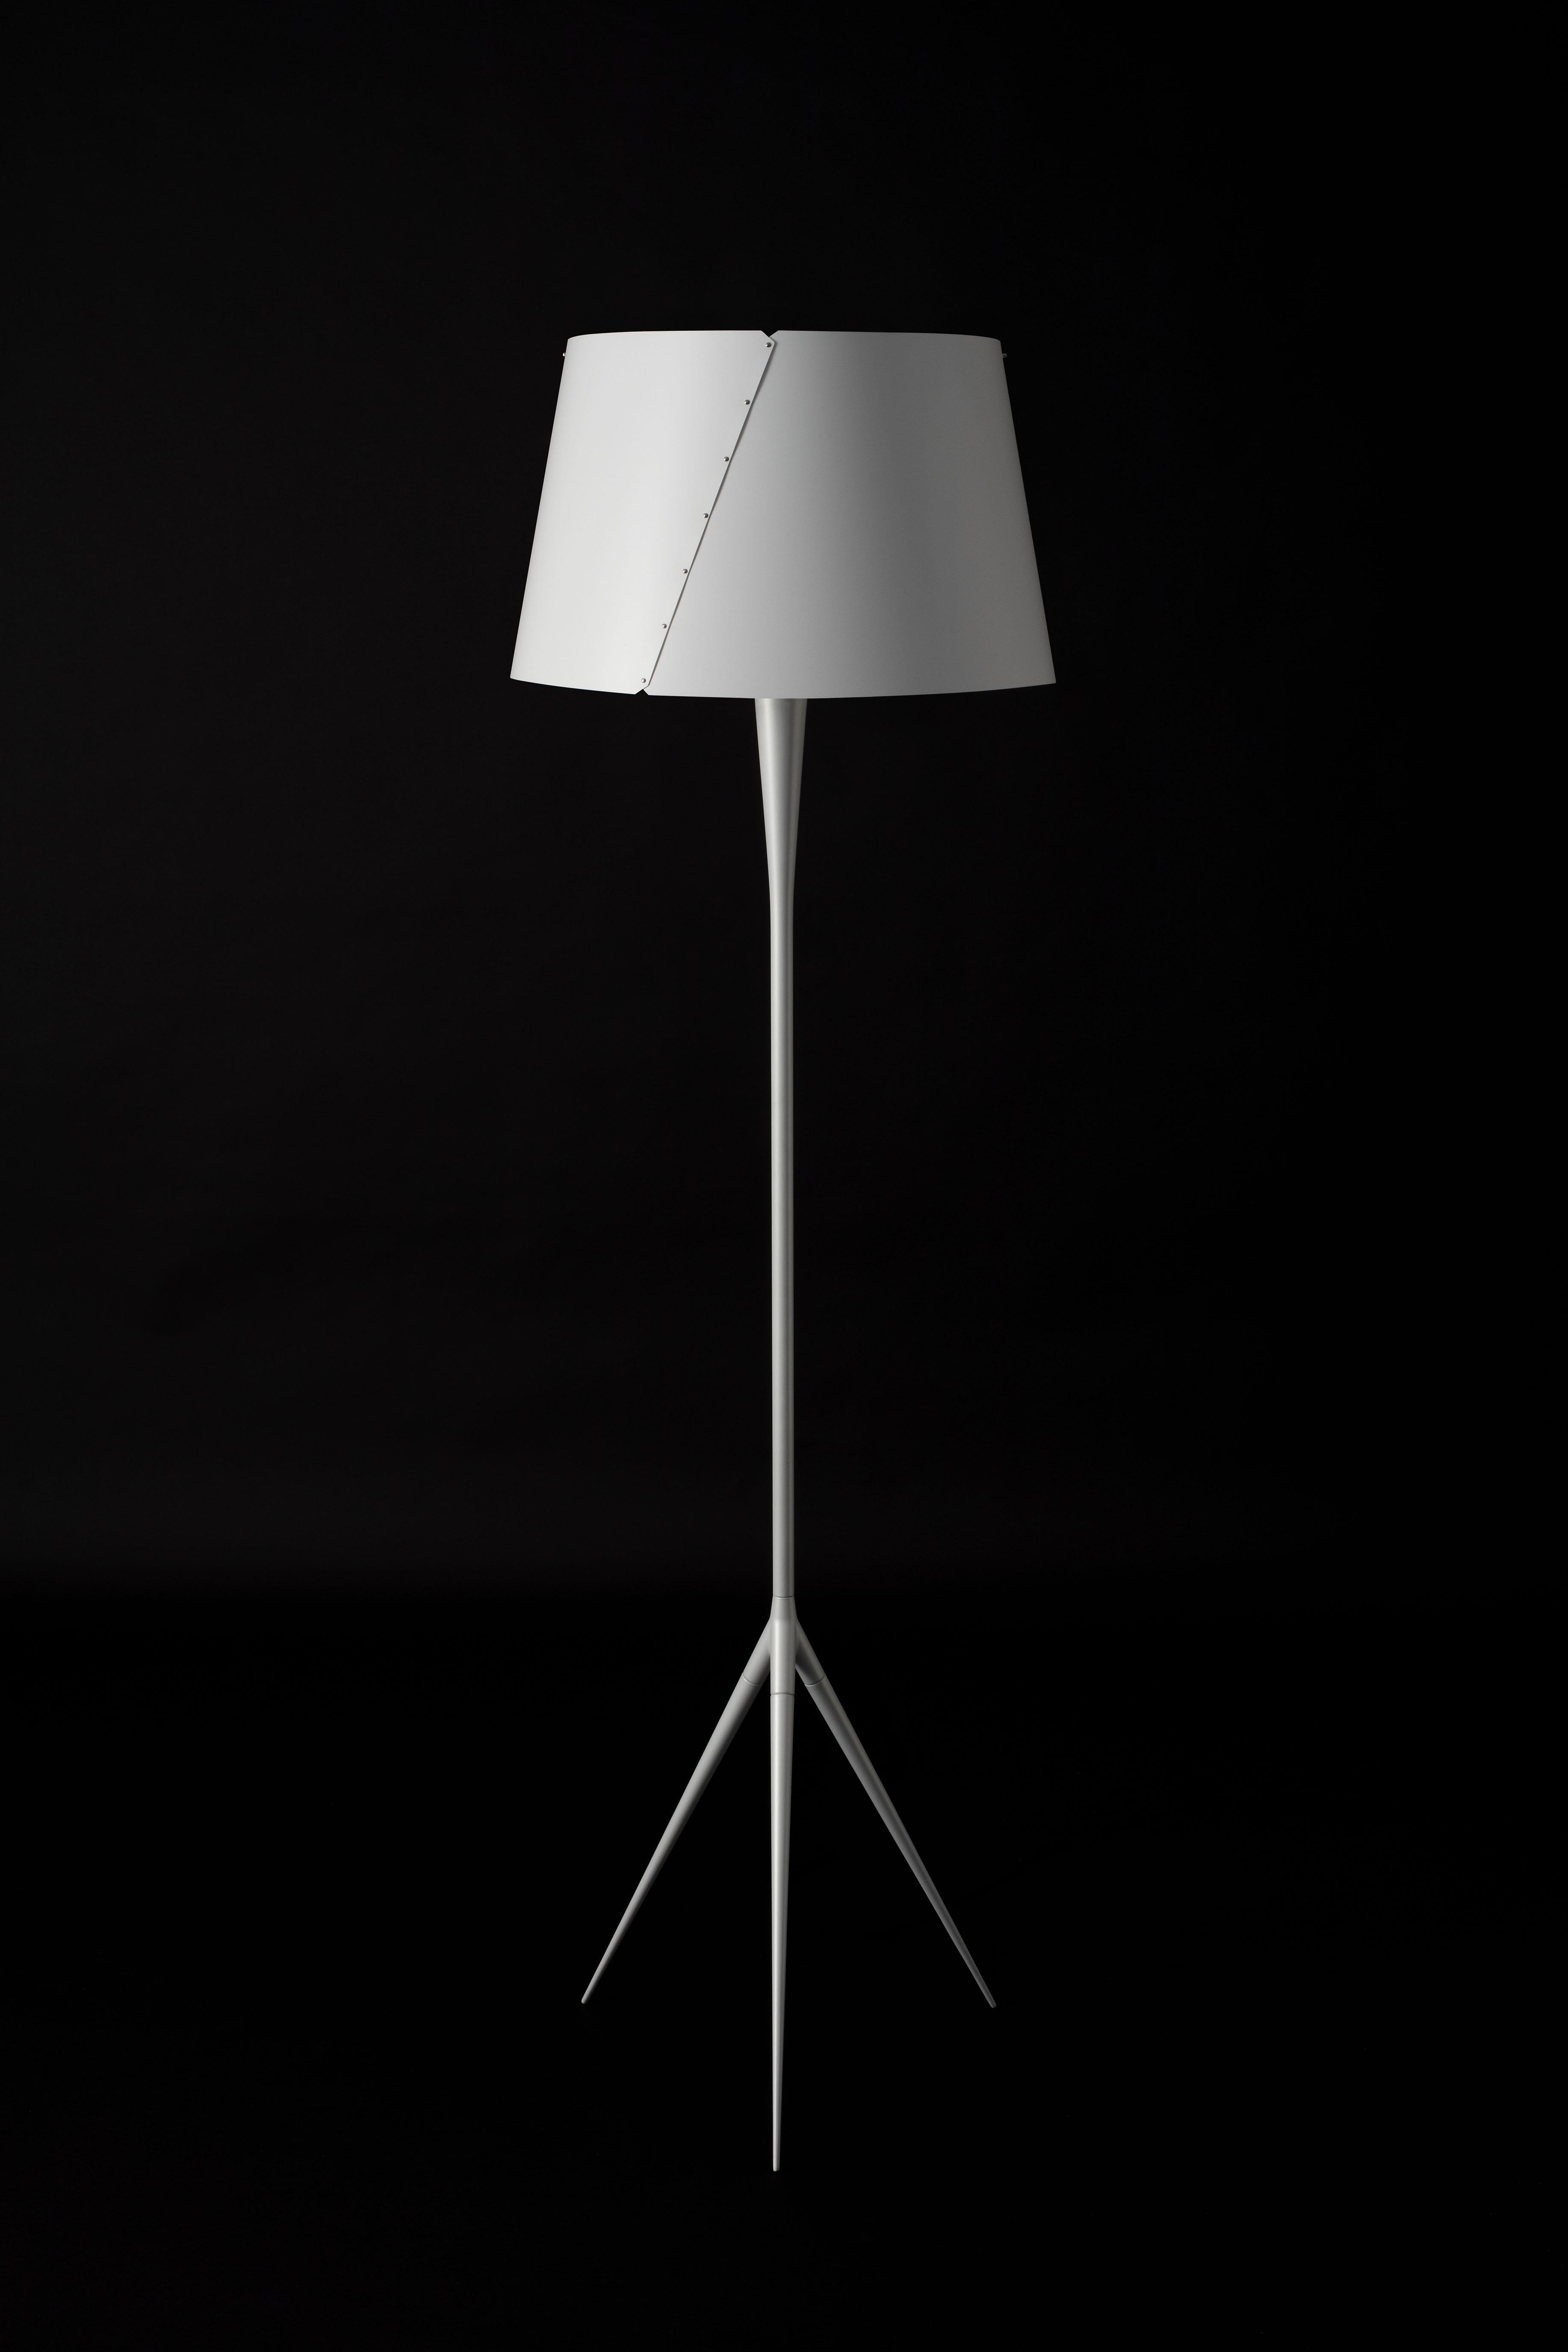 Gio Ponti De-Lux B4 floor lamp in silver for Tato Italia. 

Originally designed by Italian icon Gio Ponti in 1955, this authorized re-edition by Tato Italia is executed in aluminum and iron with a white polypropylene shade.

Price is per item.